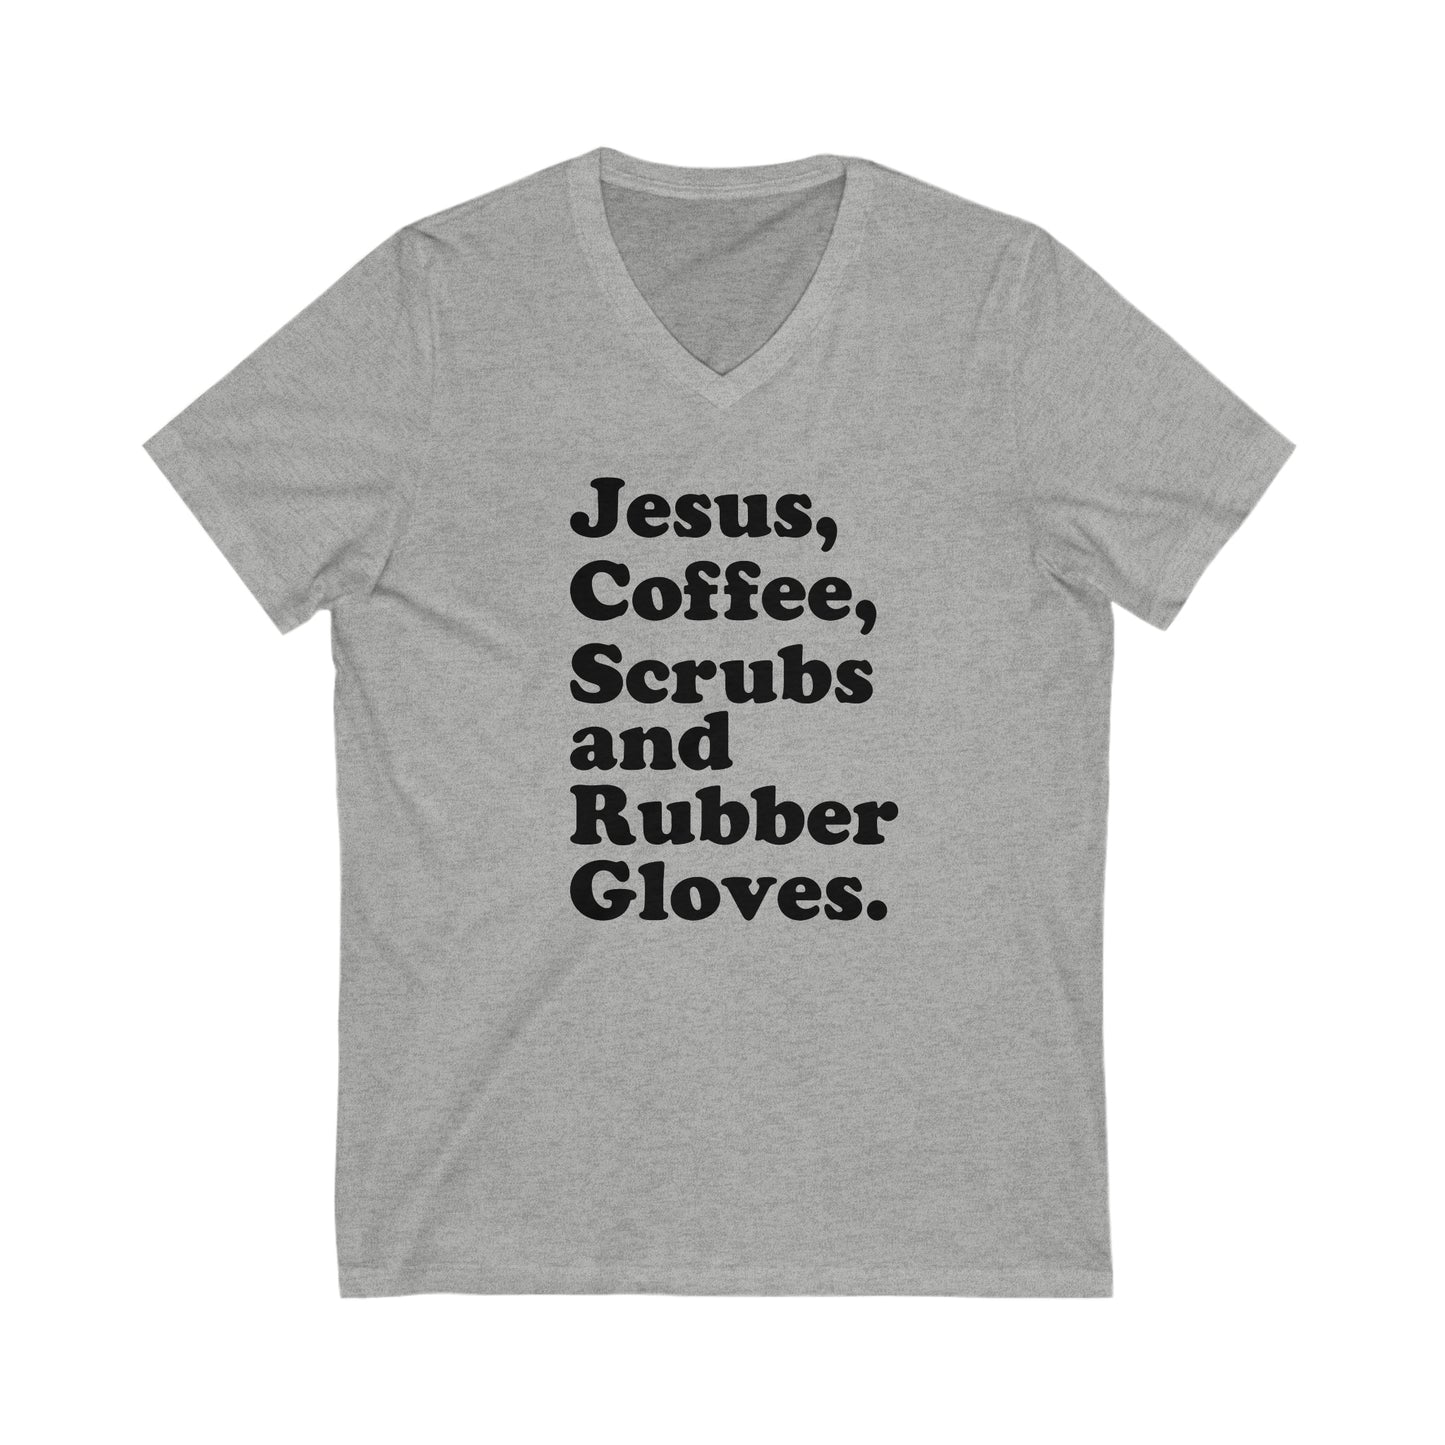 Jesus, Coffee, Scrubs, and Rubber Gloves V-Neck